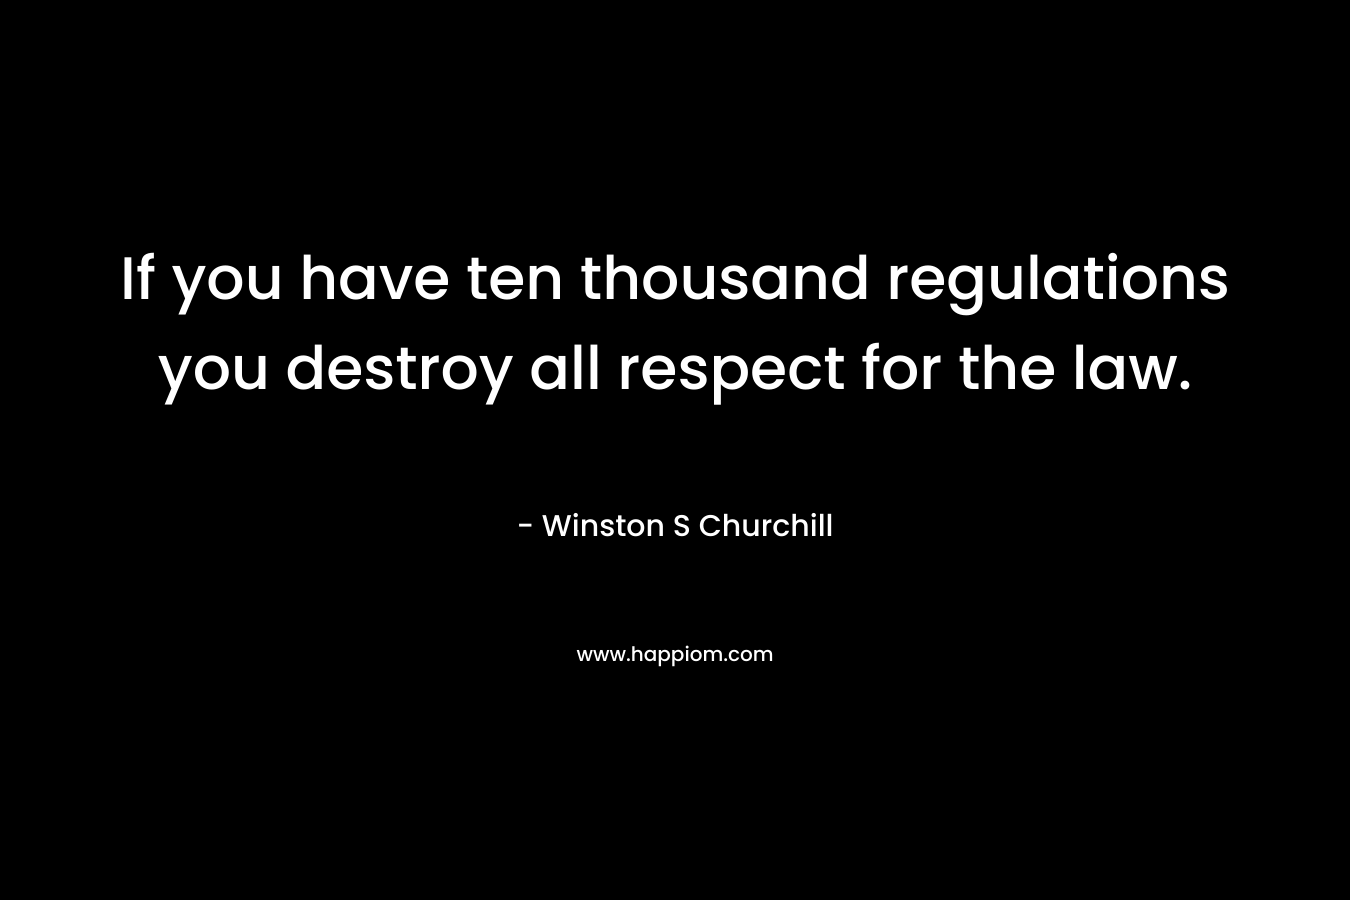 If you have ten thousand regulations you destroy all respect for the law. – Winston S Churchill